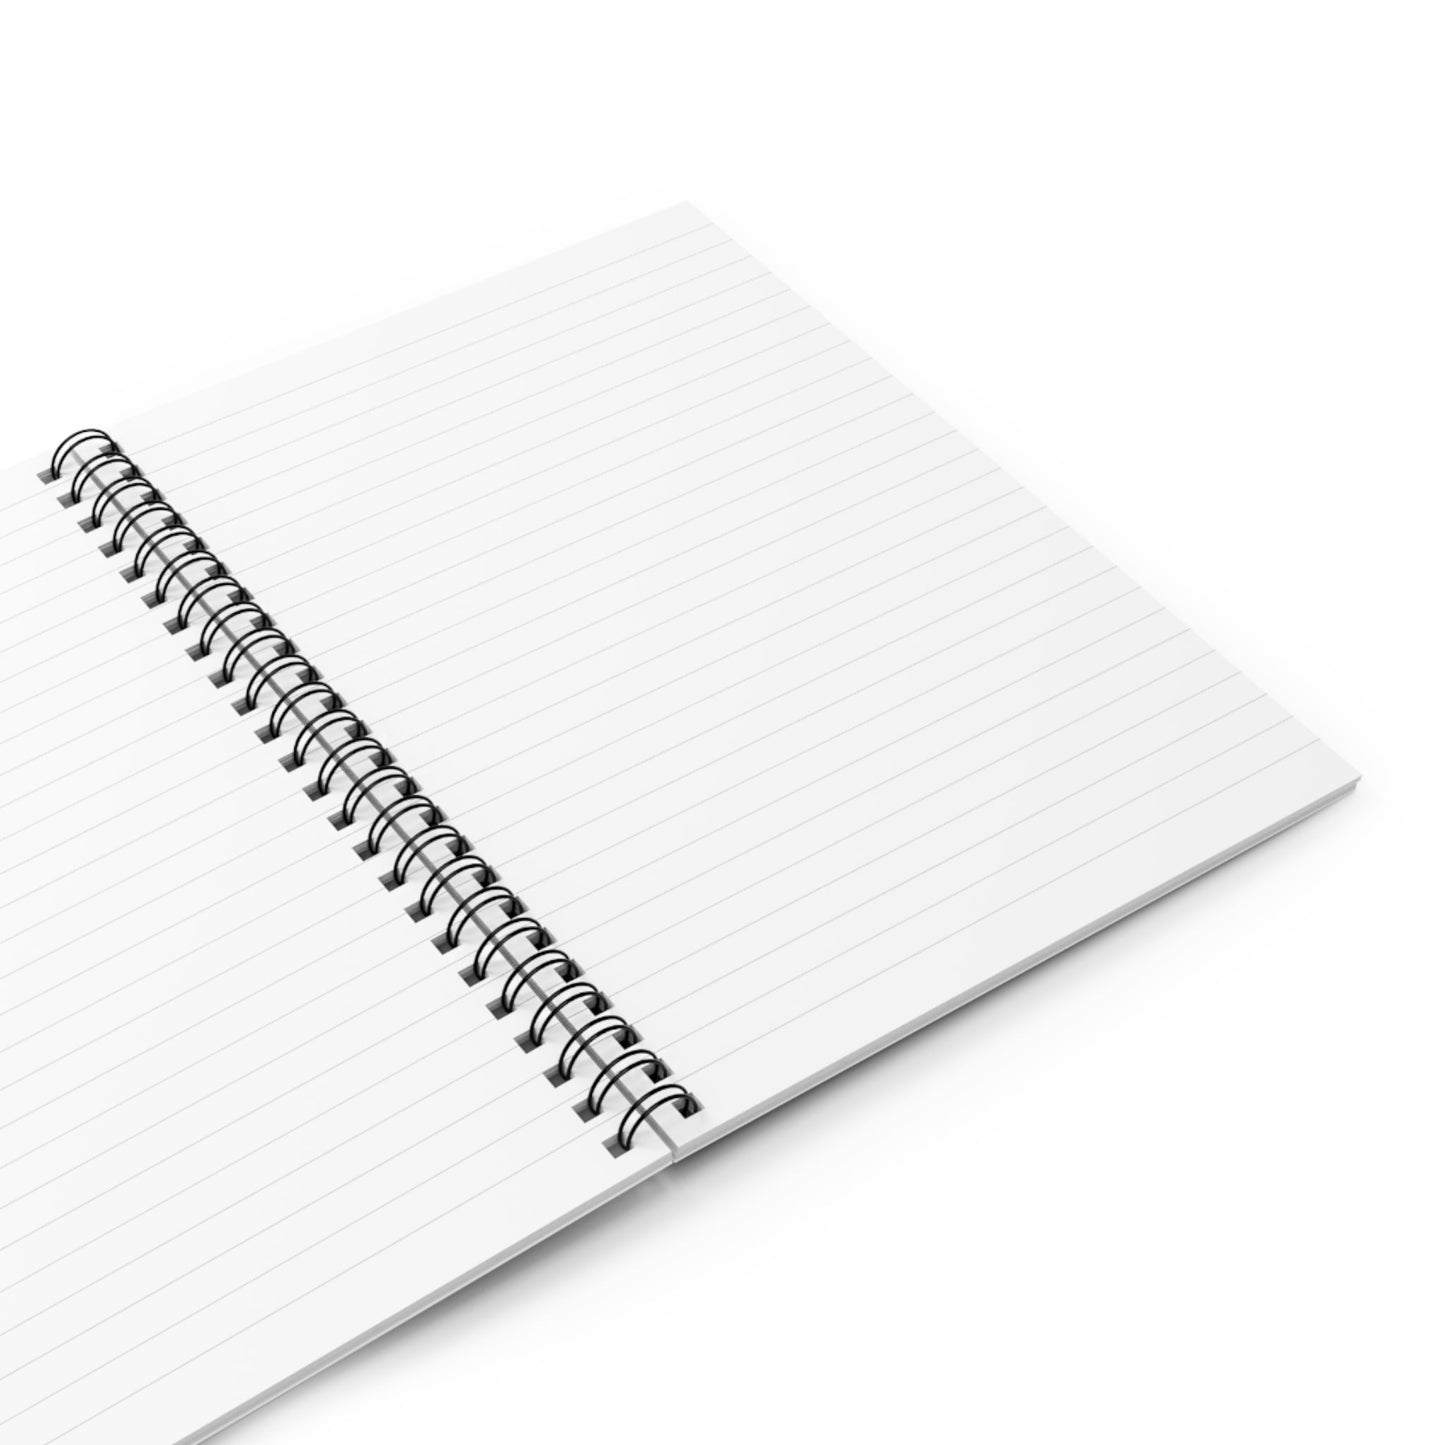 Spiral Notebook with Young Maiden Cover Opened with Blank White College Ruled Pages